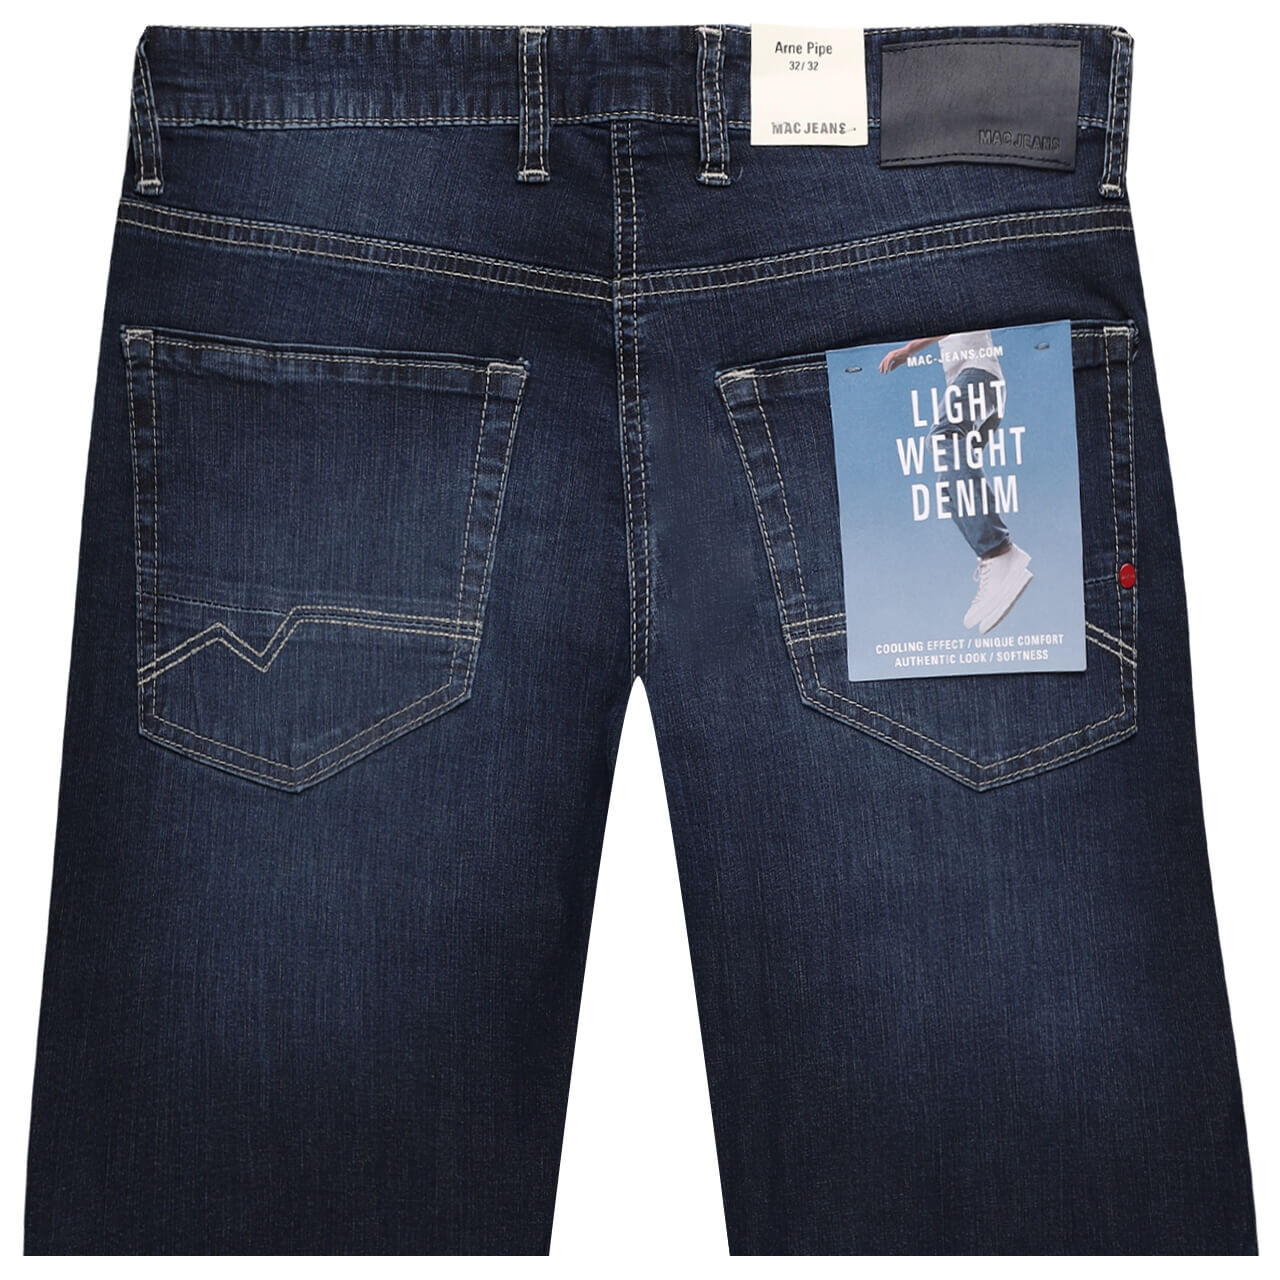 MAC Arne Pipe Jeans deep blue authentic wash